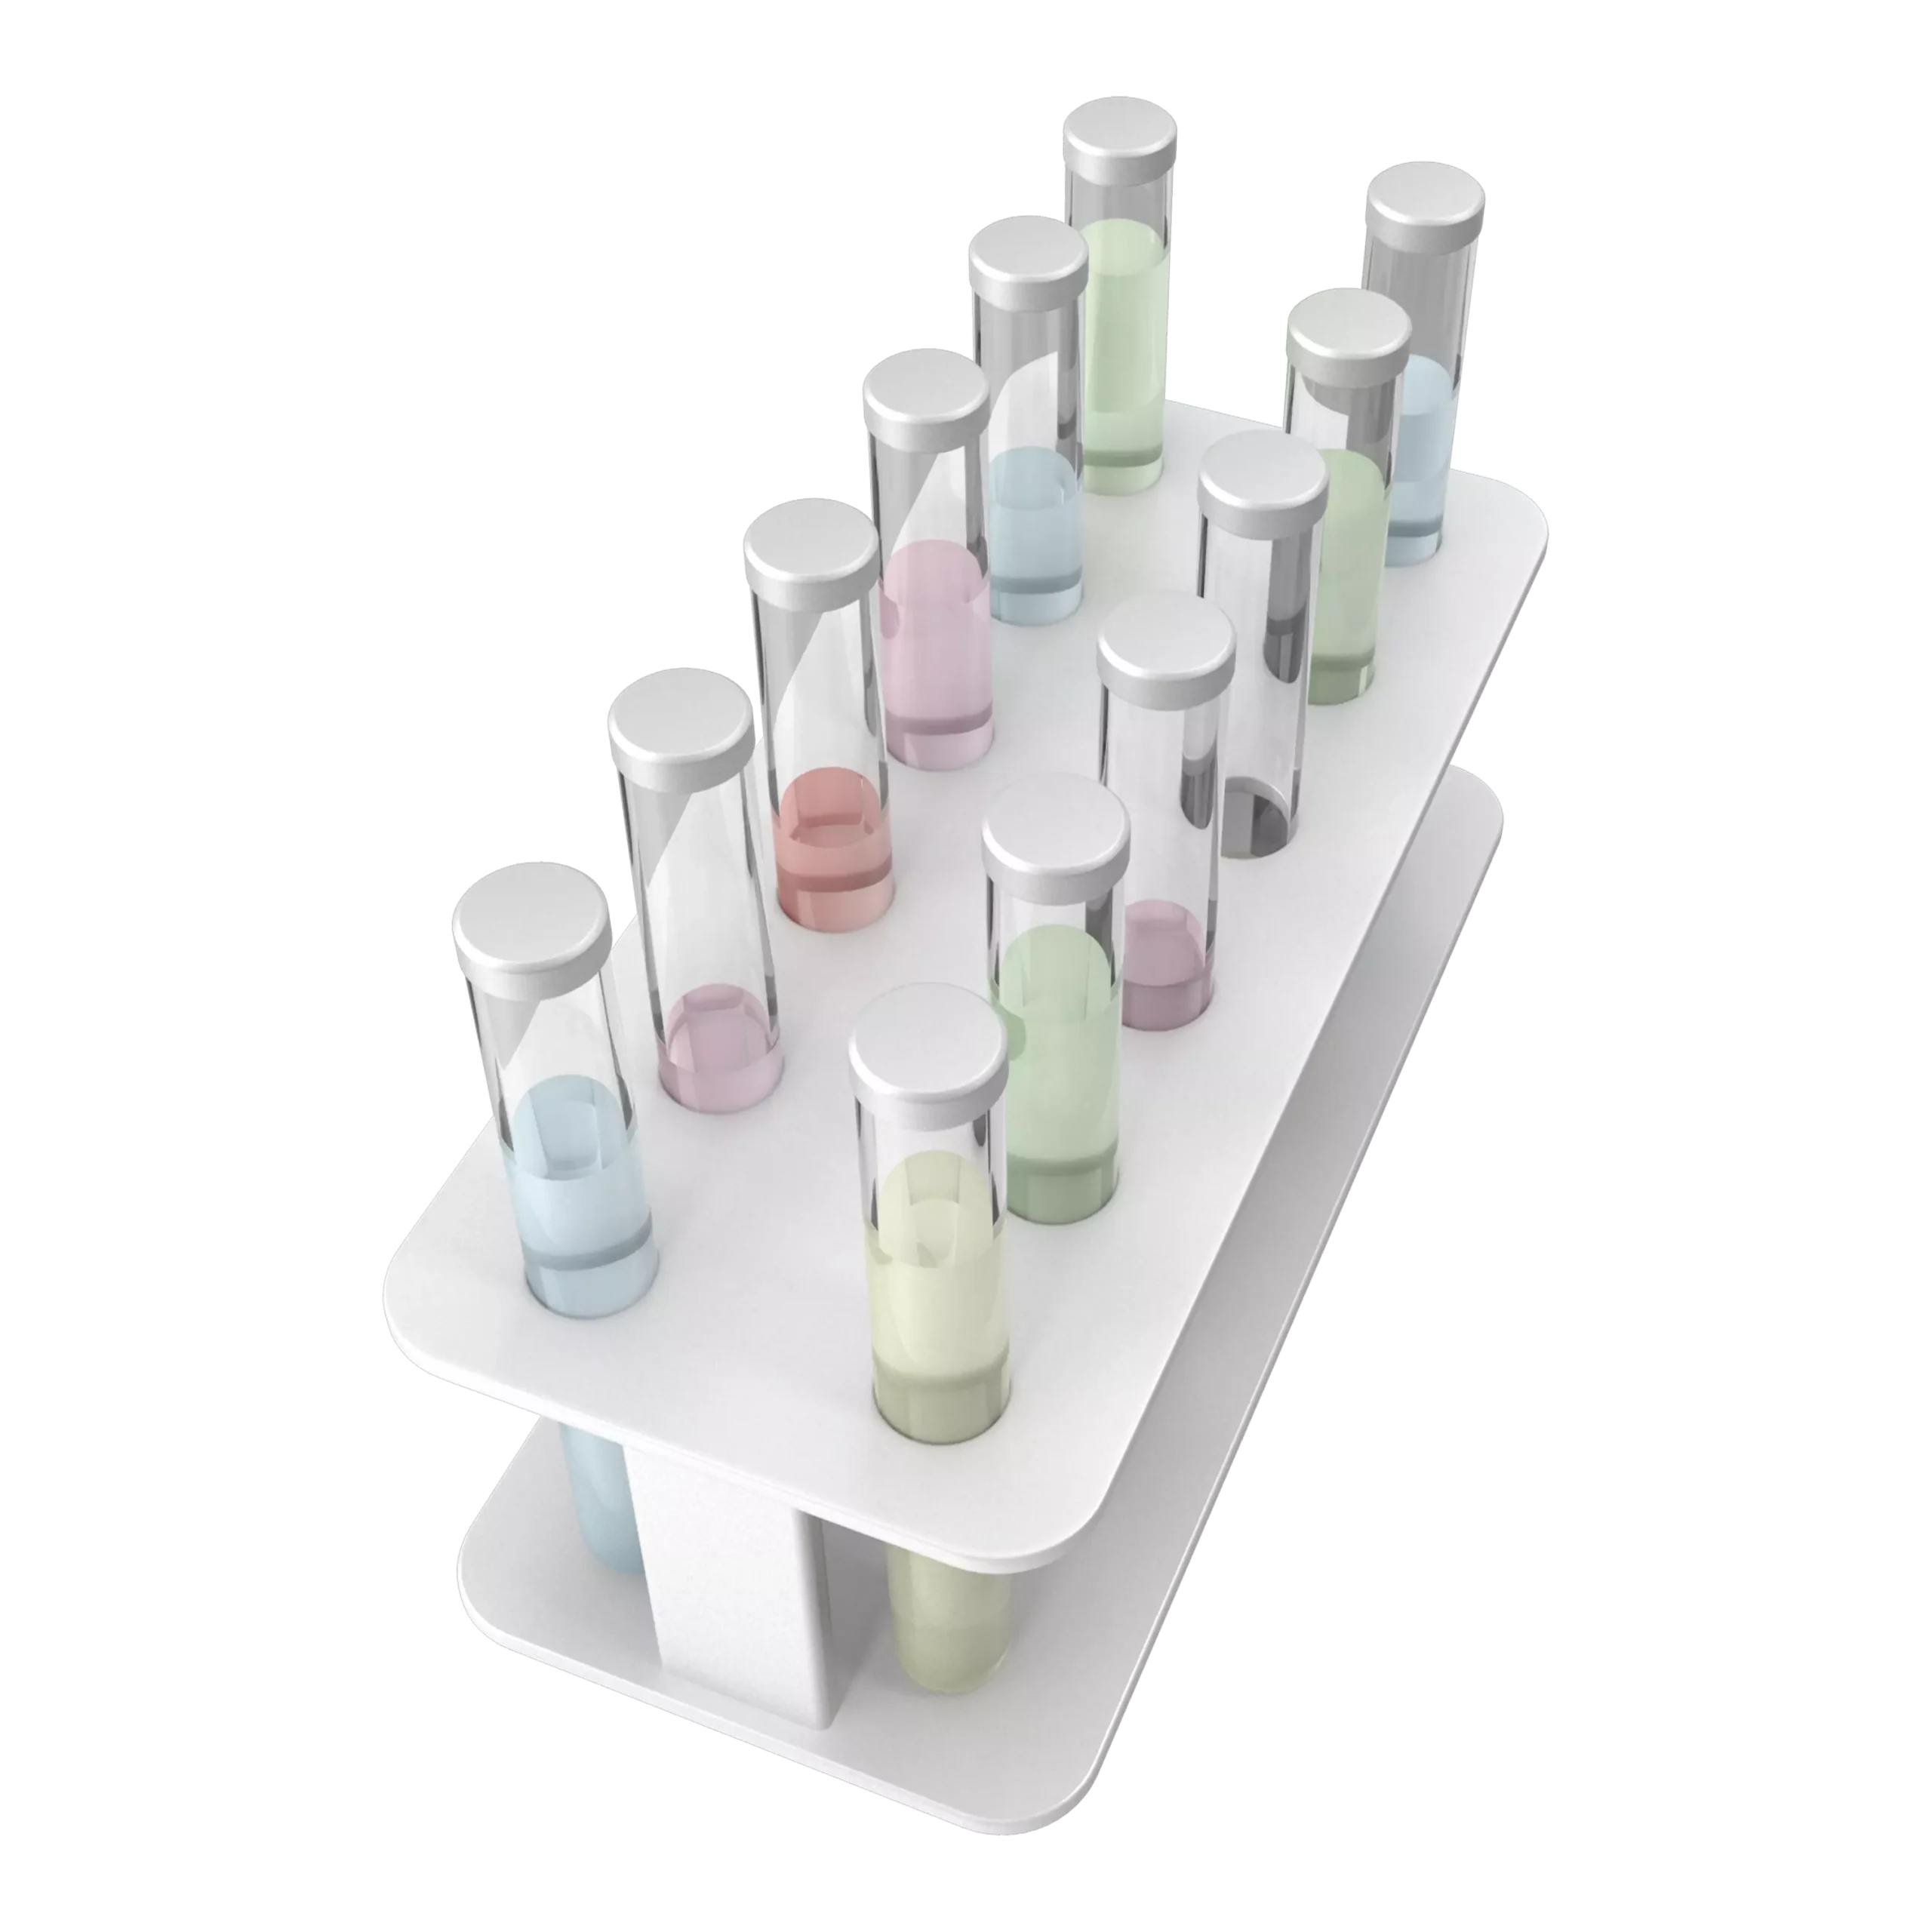 An array of test tubes as the Advanced Analytics quickcard header image